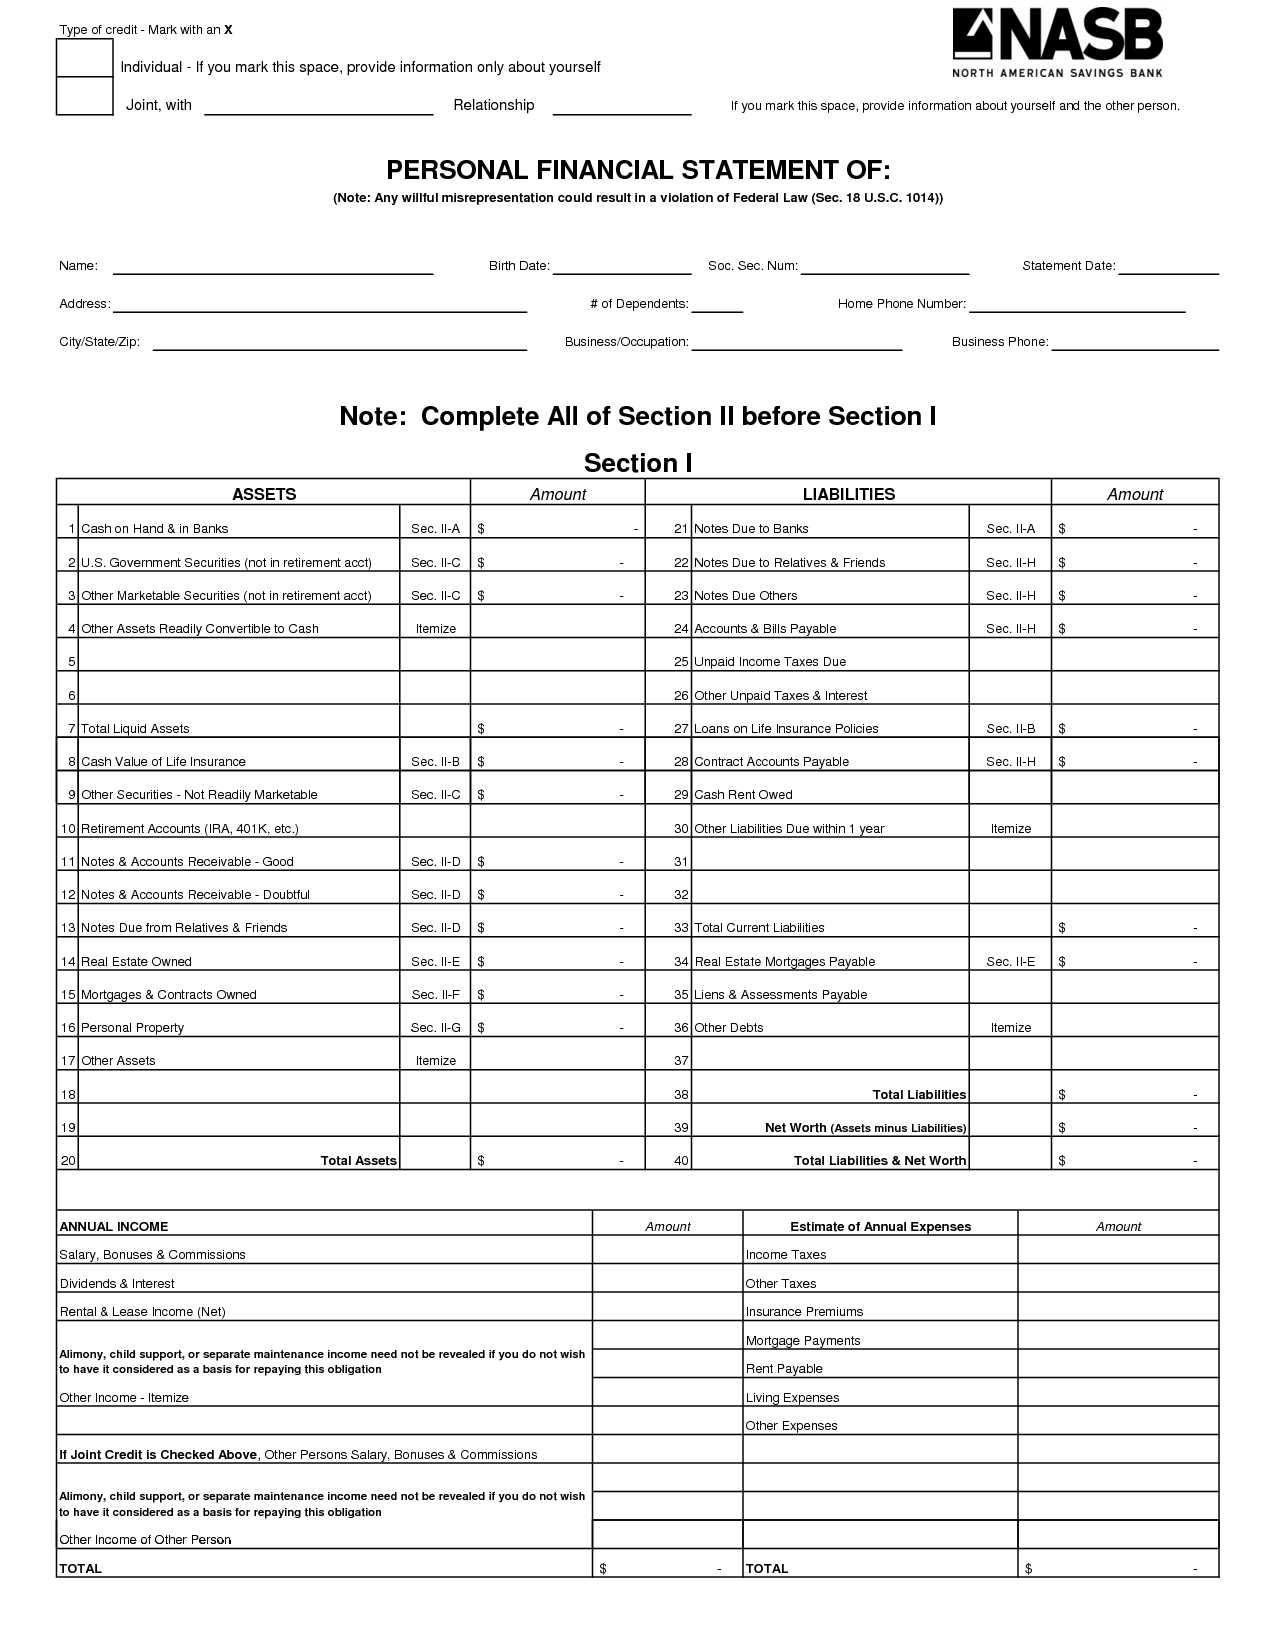 Monthly Budget Worksheet Pdf as Well as Free Printable Personal Financial Statement